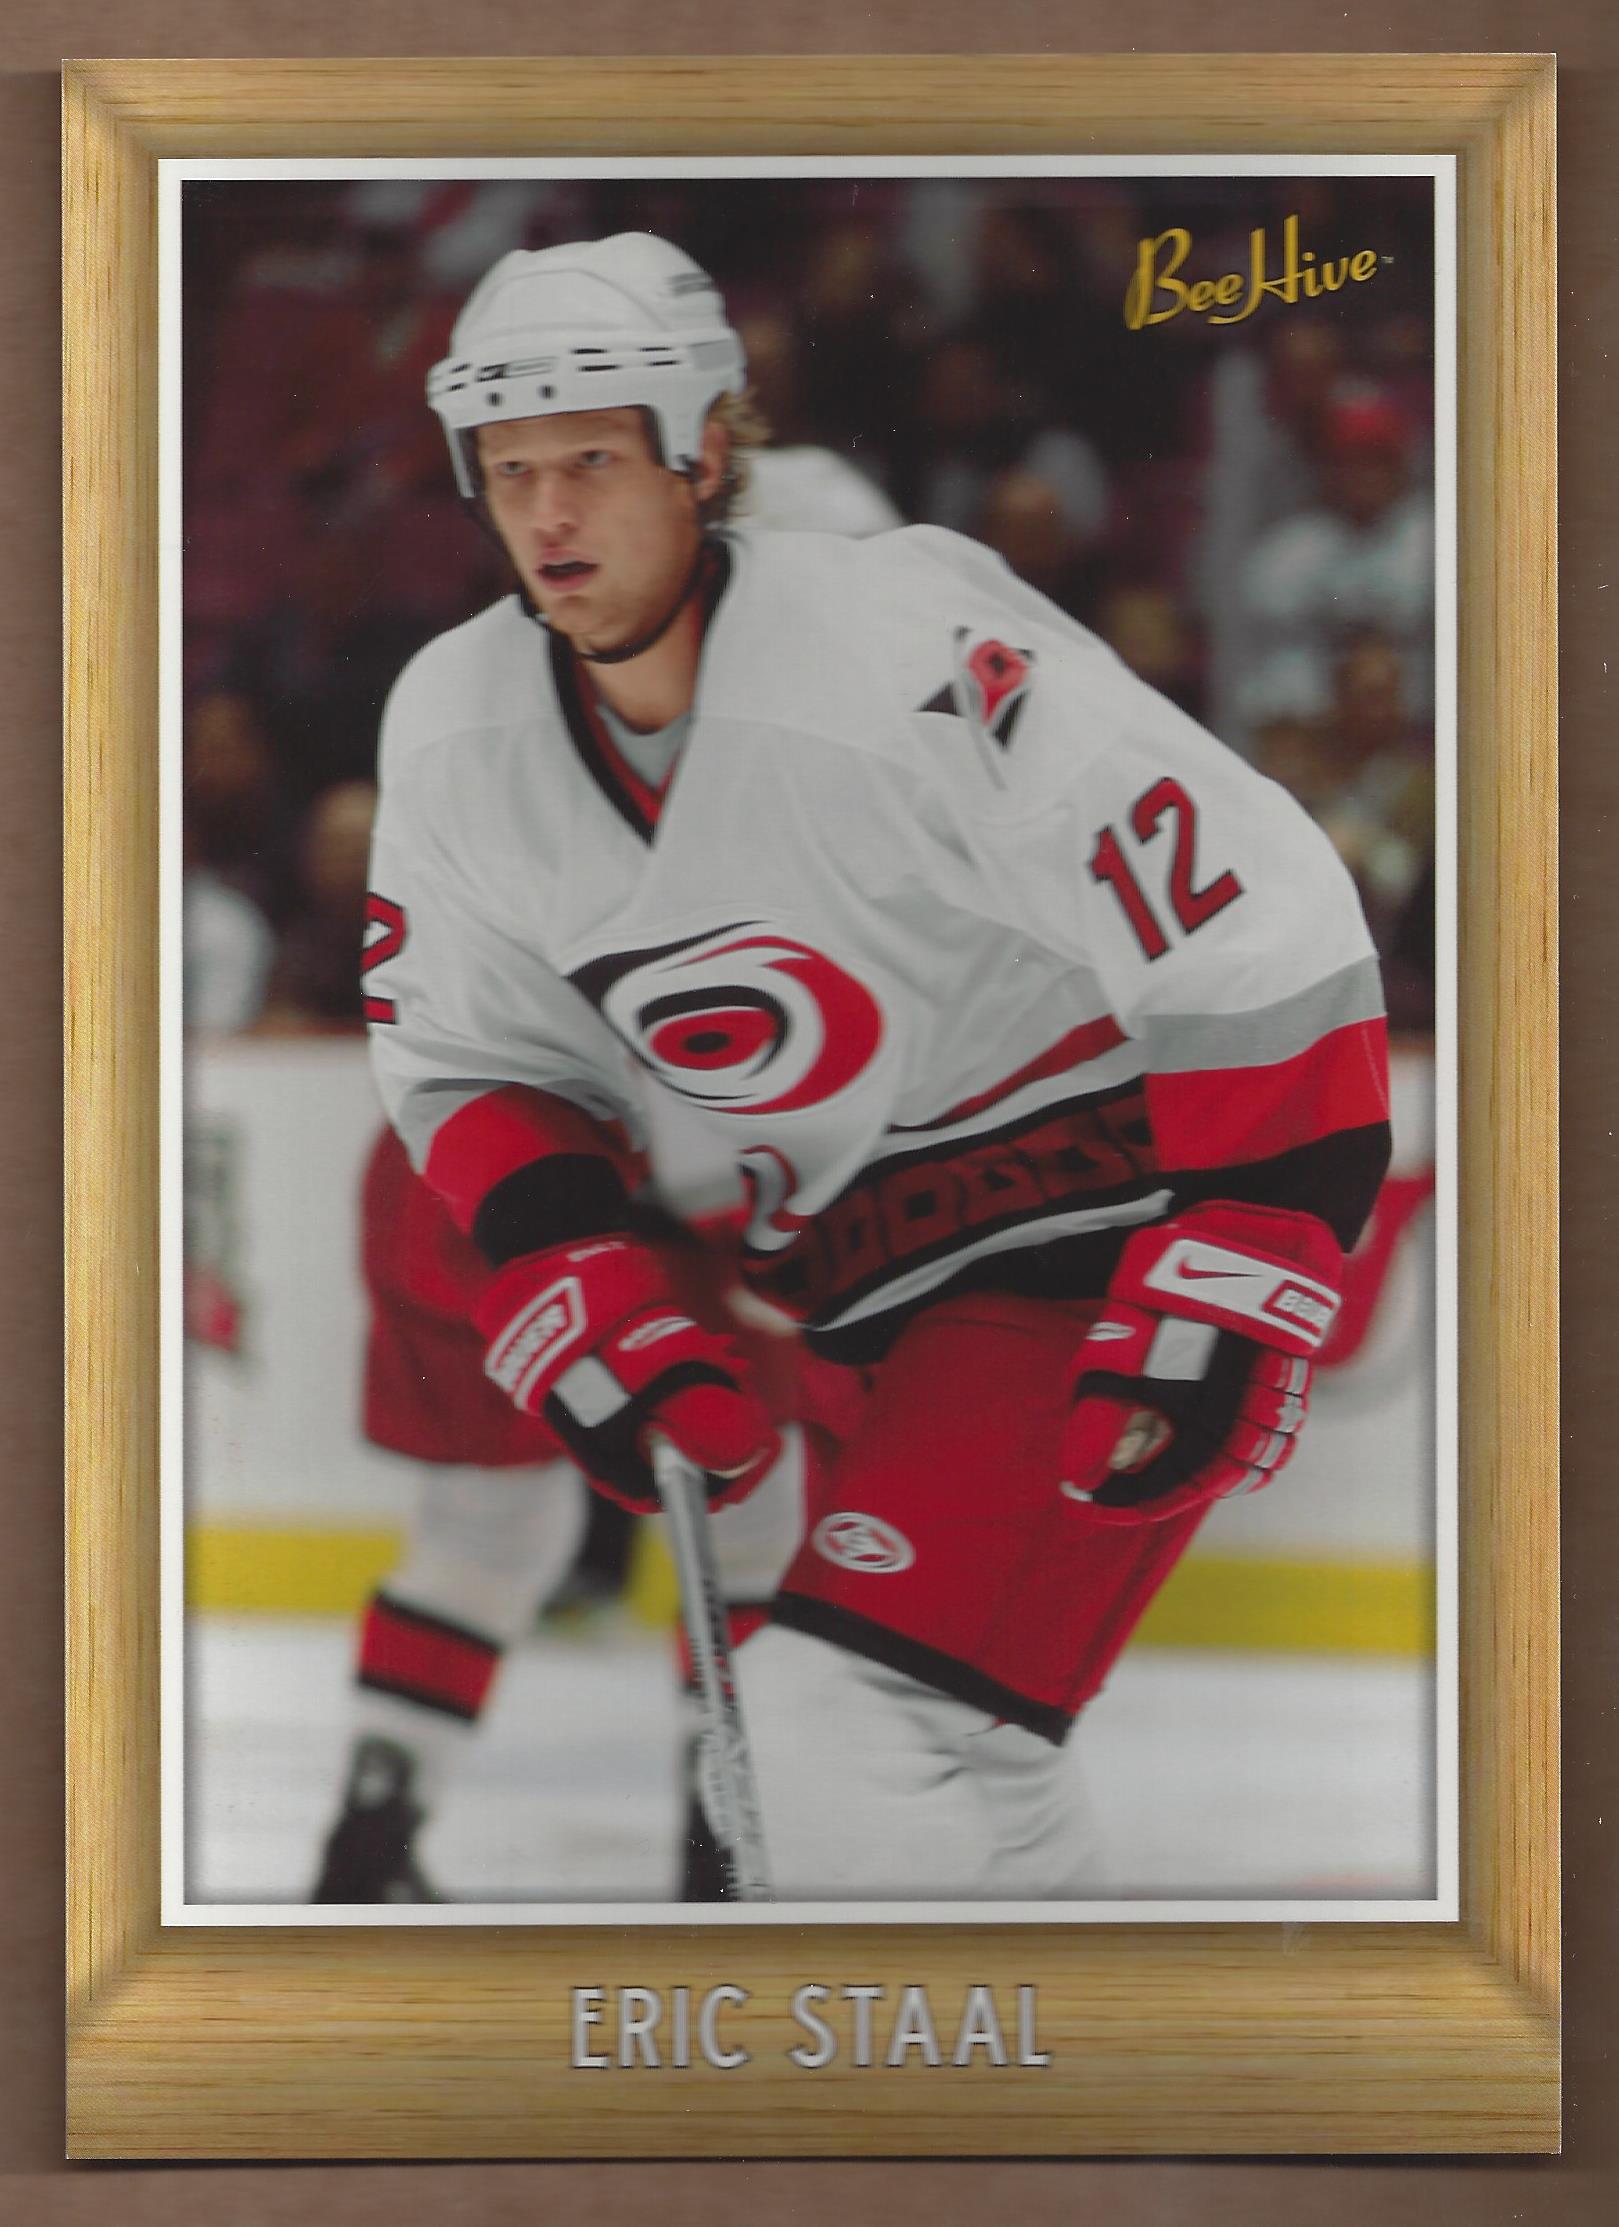 2006-07 Beehive #221 Eric Staal